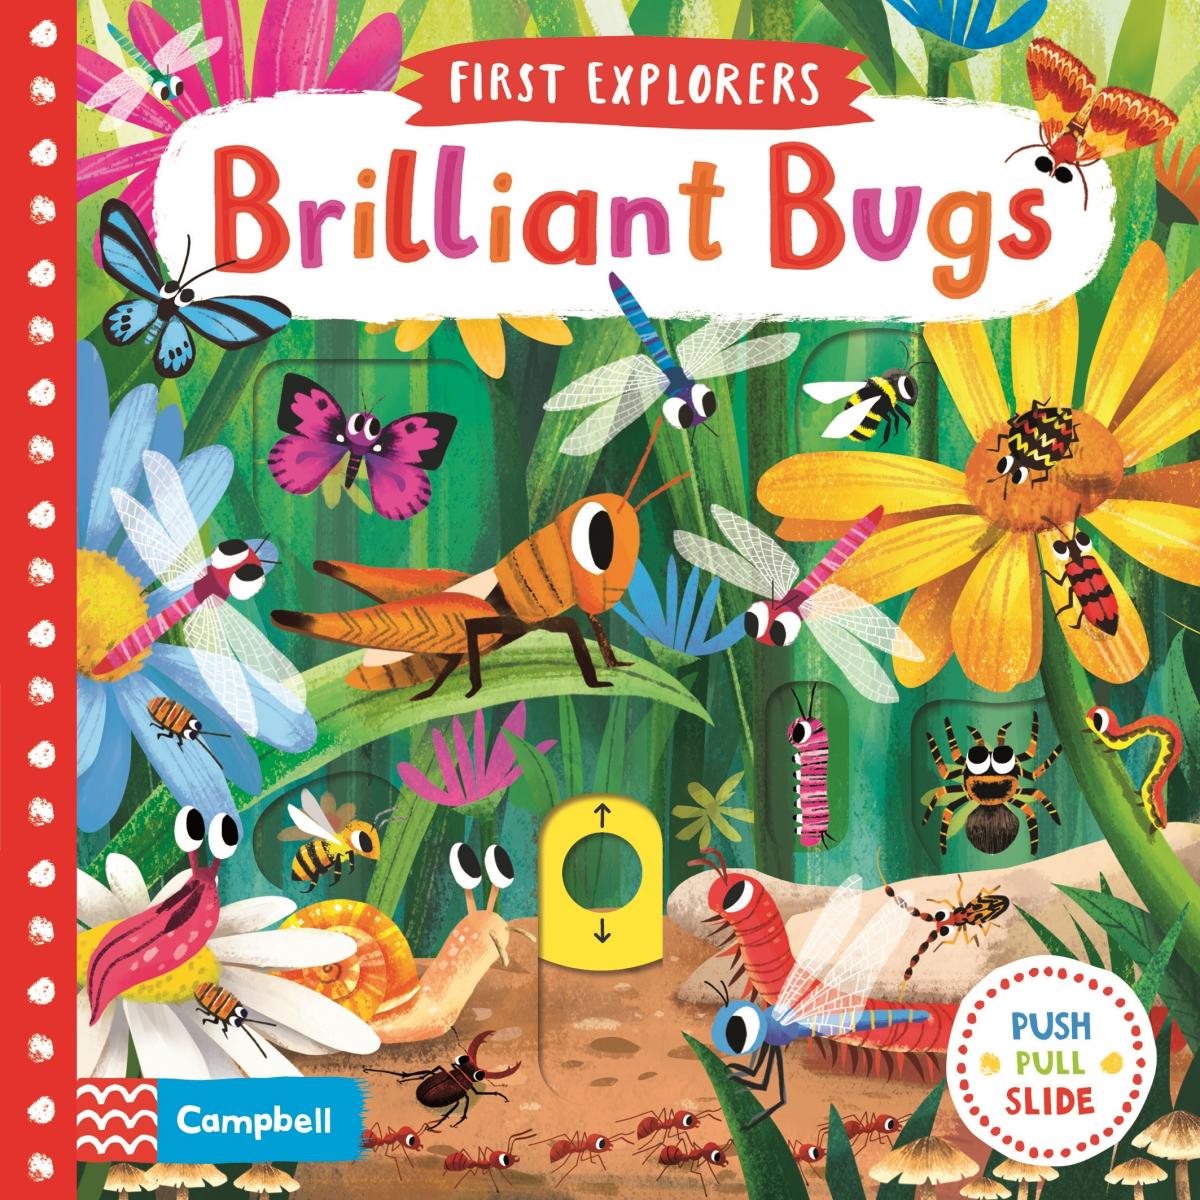 First explorers. Книга Bugs. Обложка Bugs. Chorkung "Brilliant Bugs". First Explorers: in the Jungle.